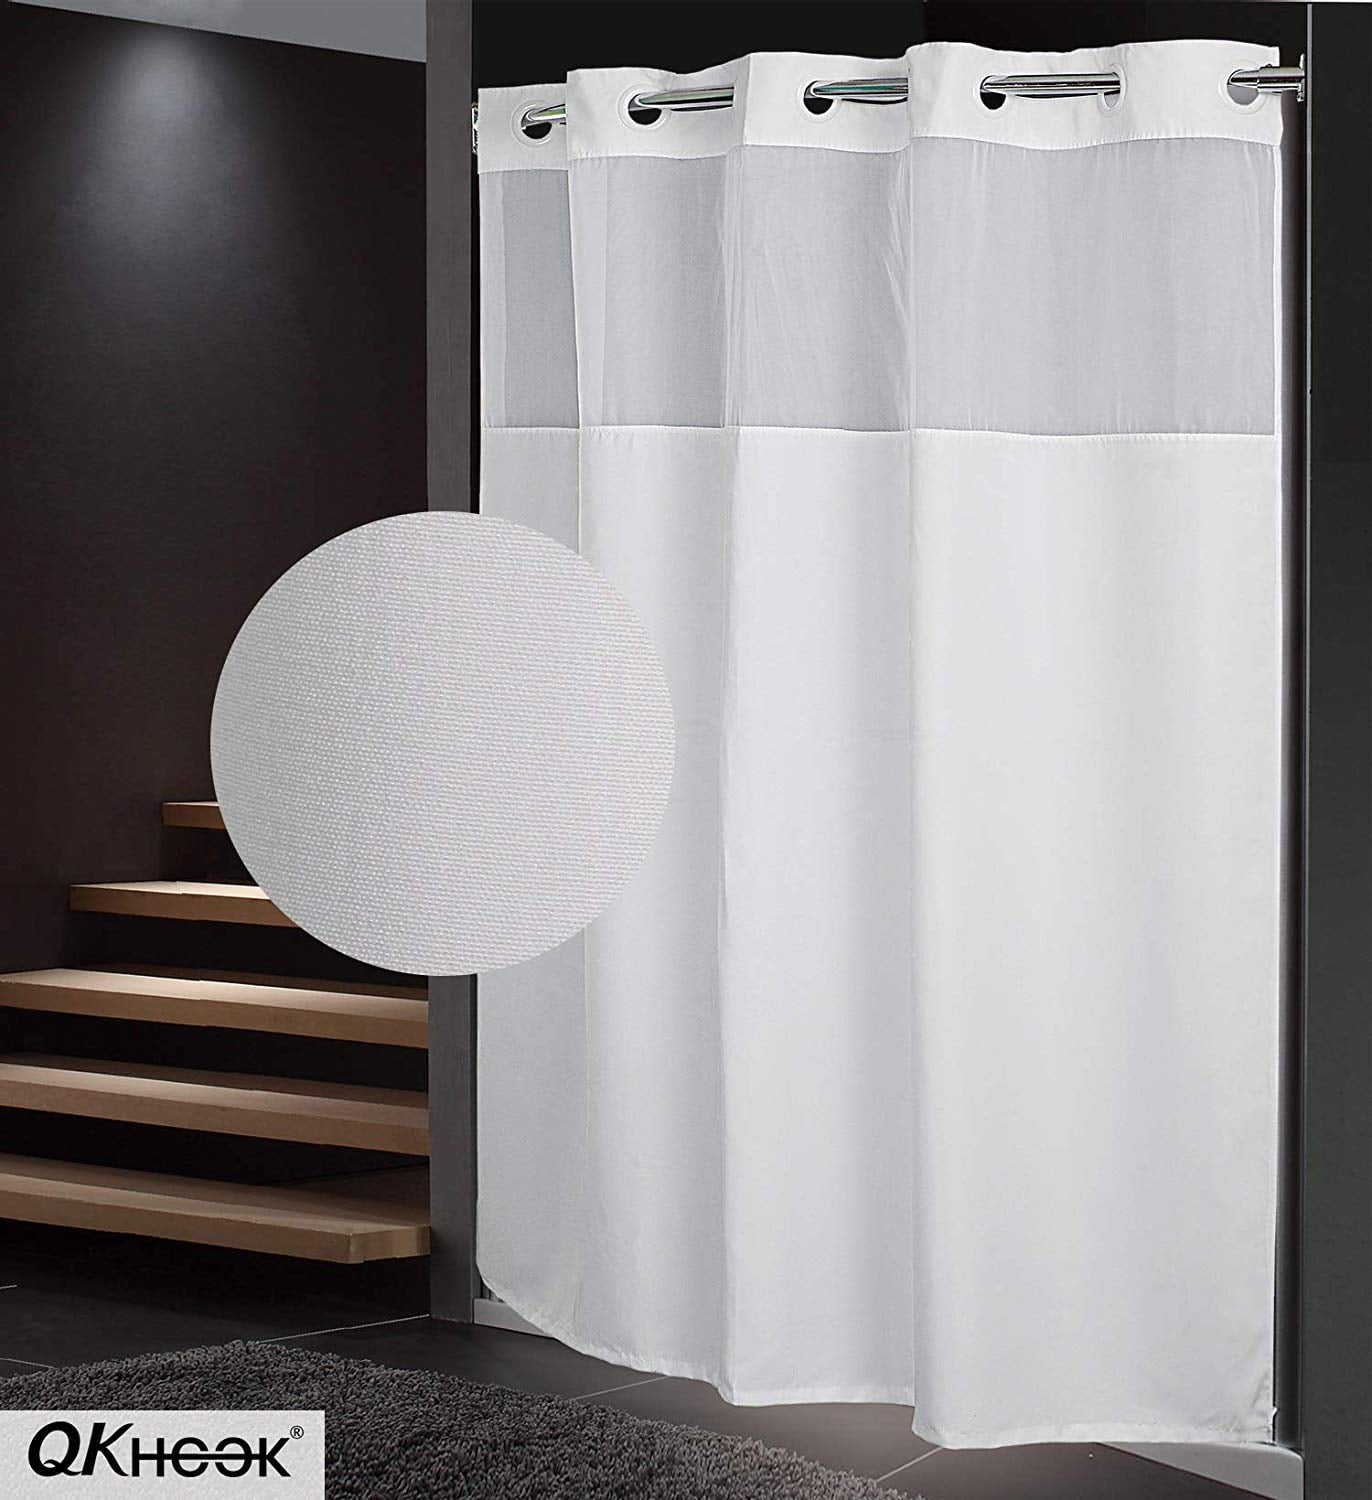 Qkhook Hookless Shower Curtain With, Hookless Shower Curtain Liner Clear